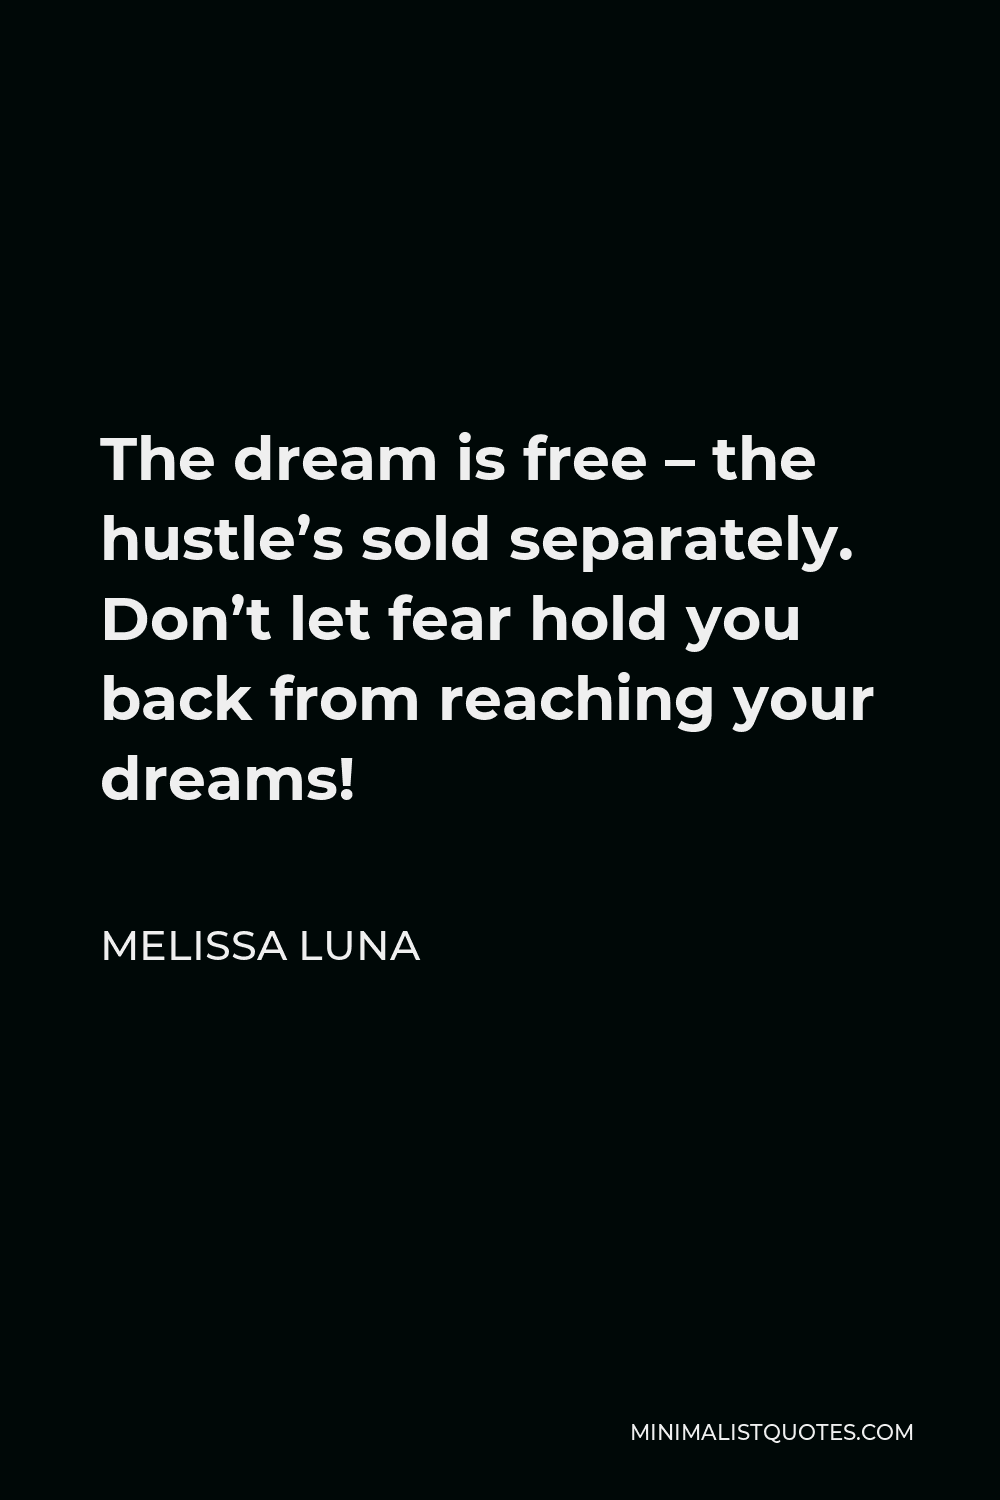 Melissa Luna Quote - The dream is free – the hustle’s sold separately. Don’t let fear hold you back from reaching your dreams!